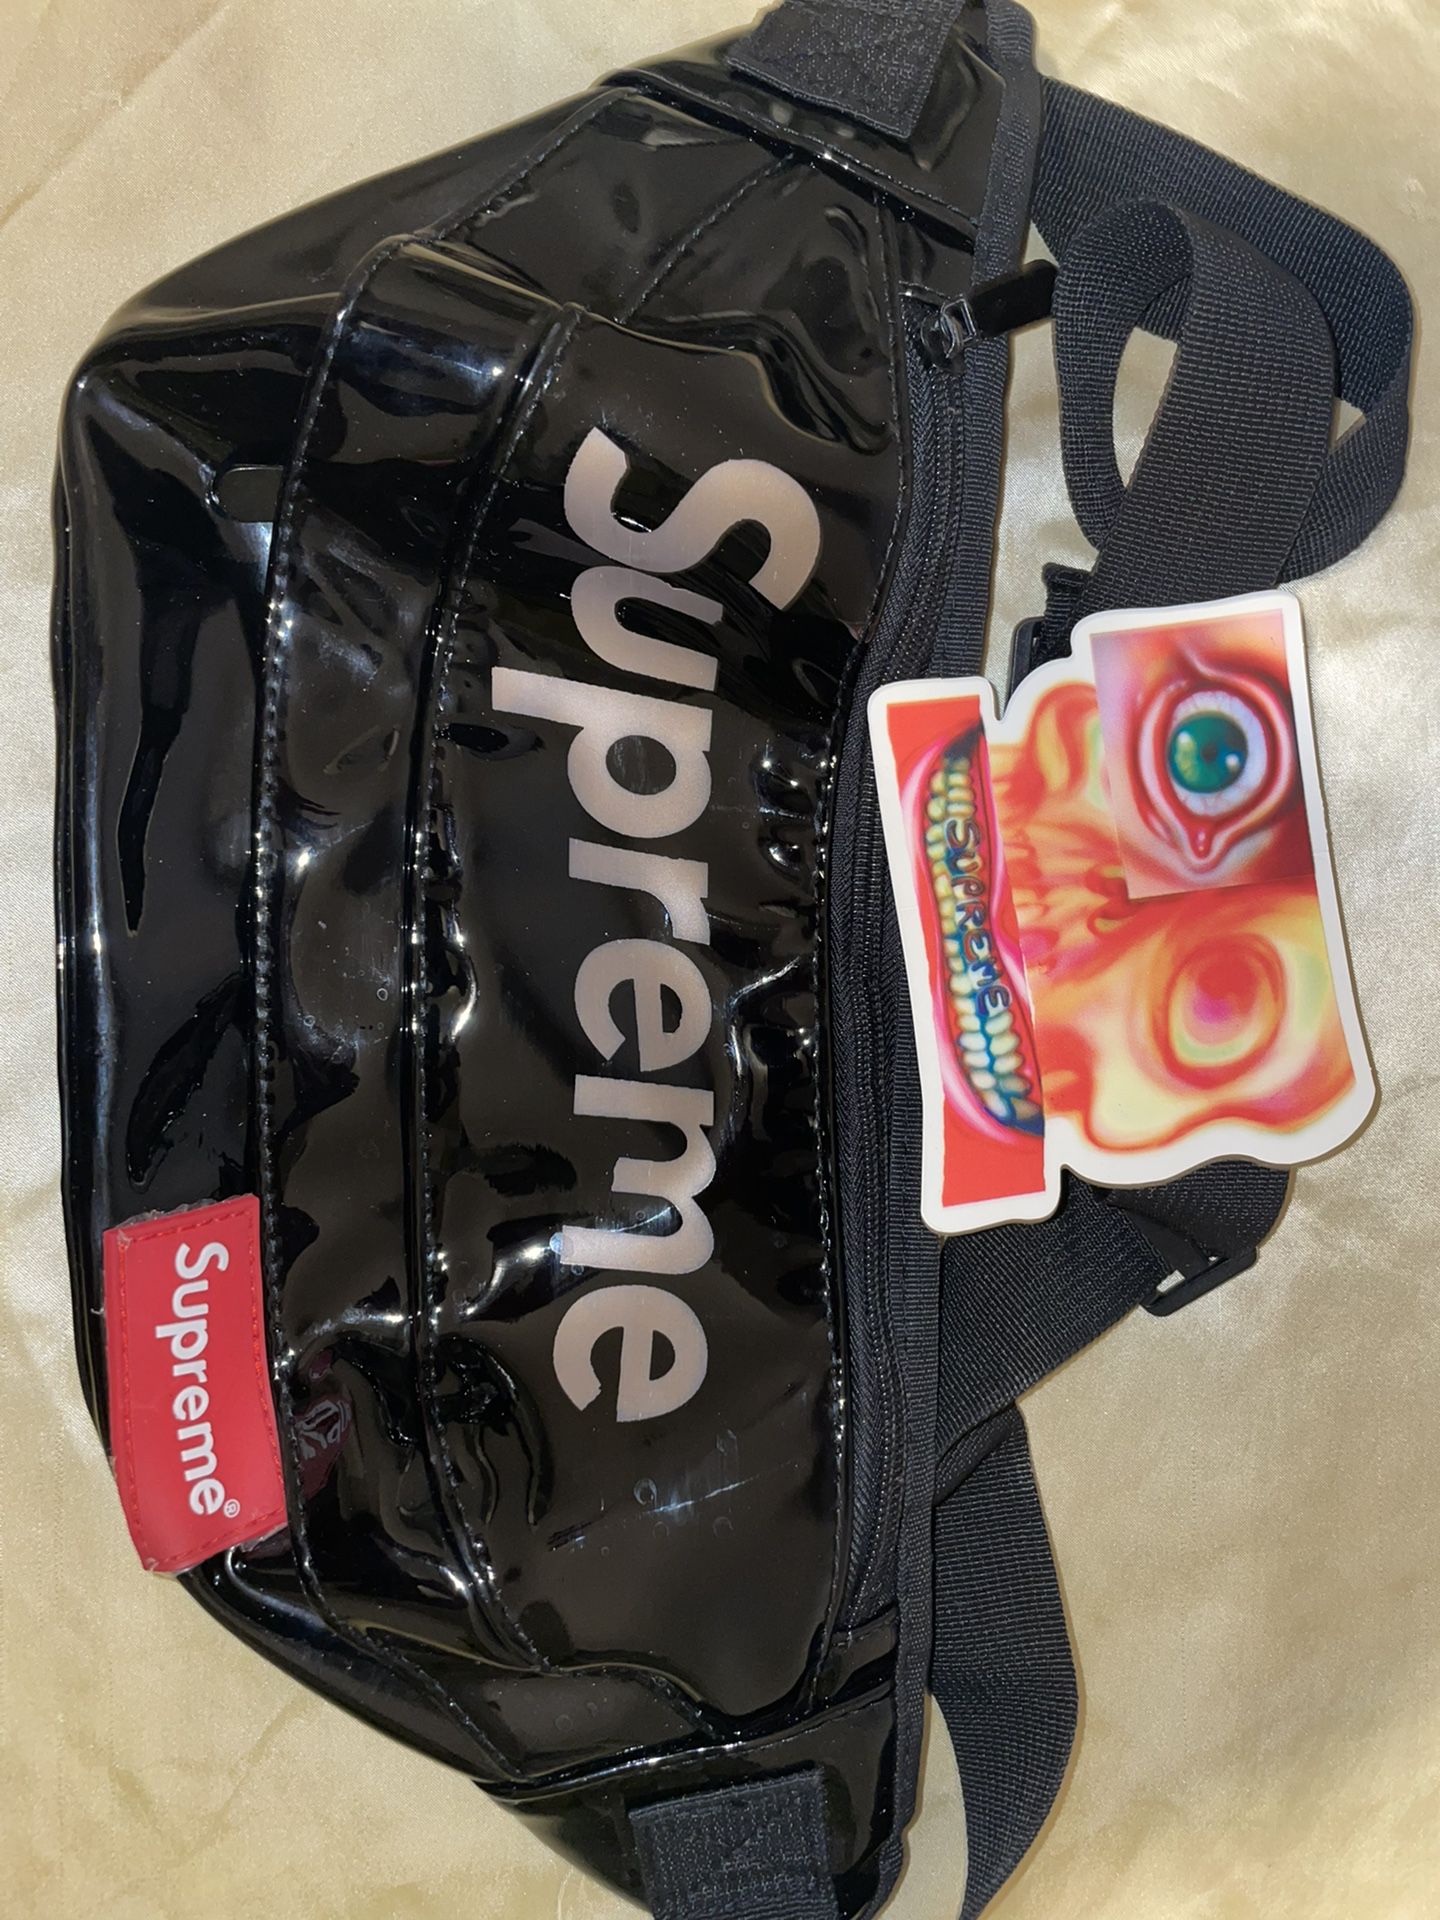 80's / 90's Fanny Pack/Supreme Fanny Pack in Retro